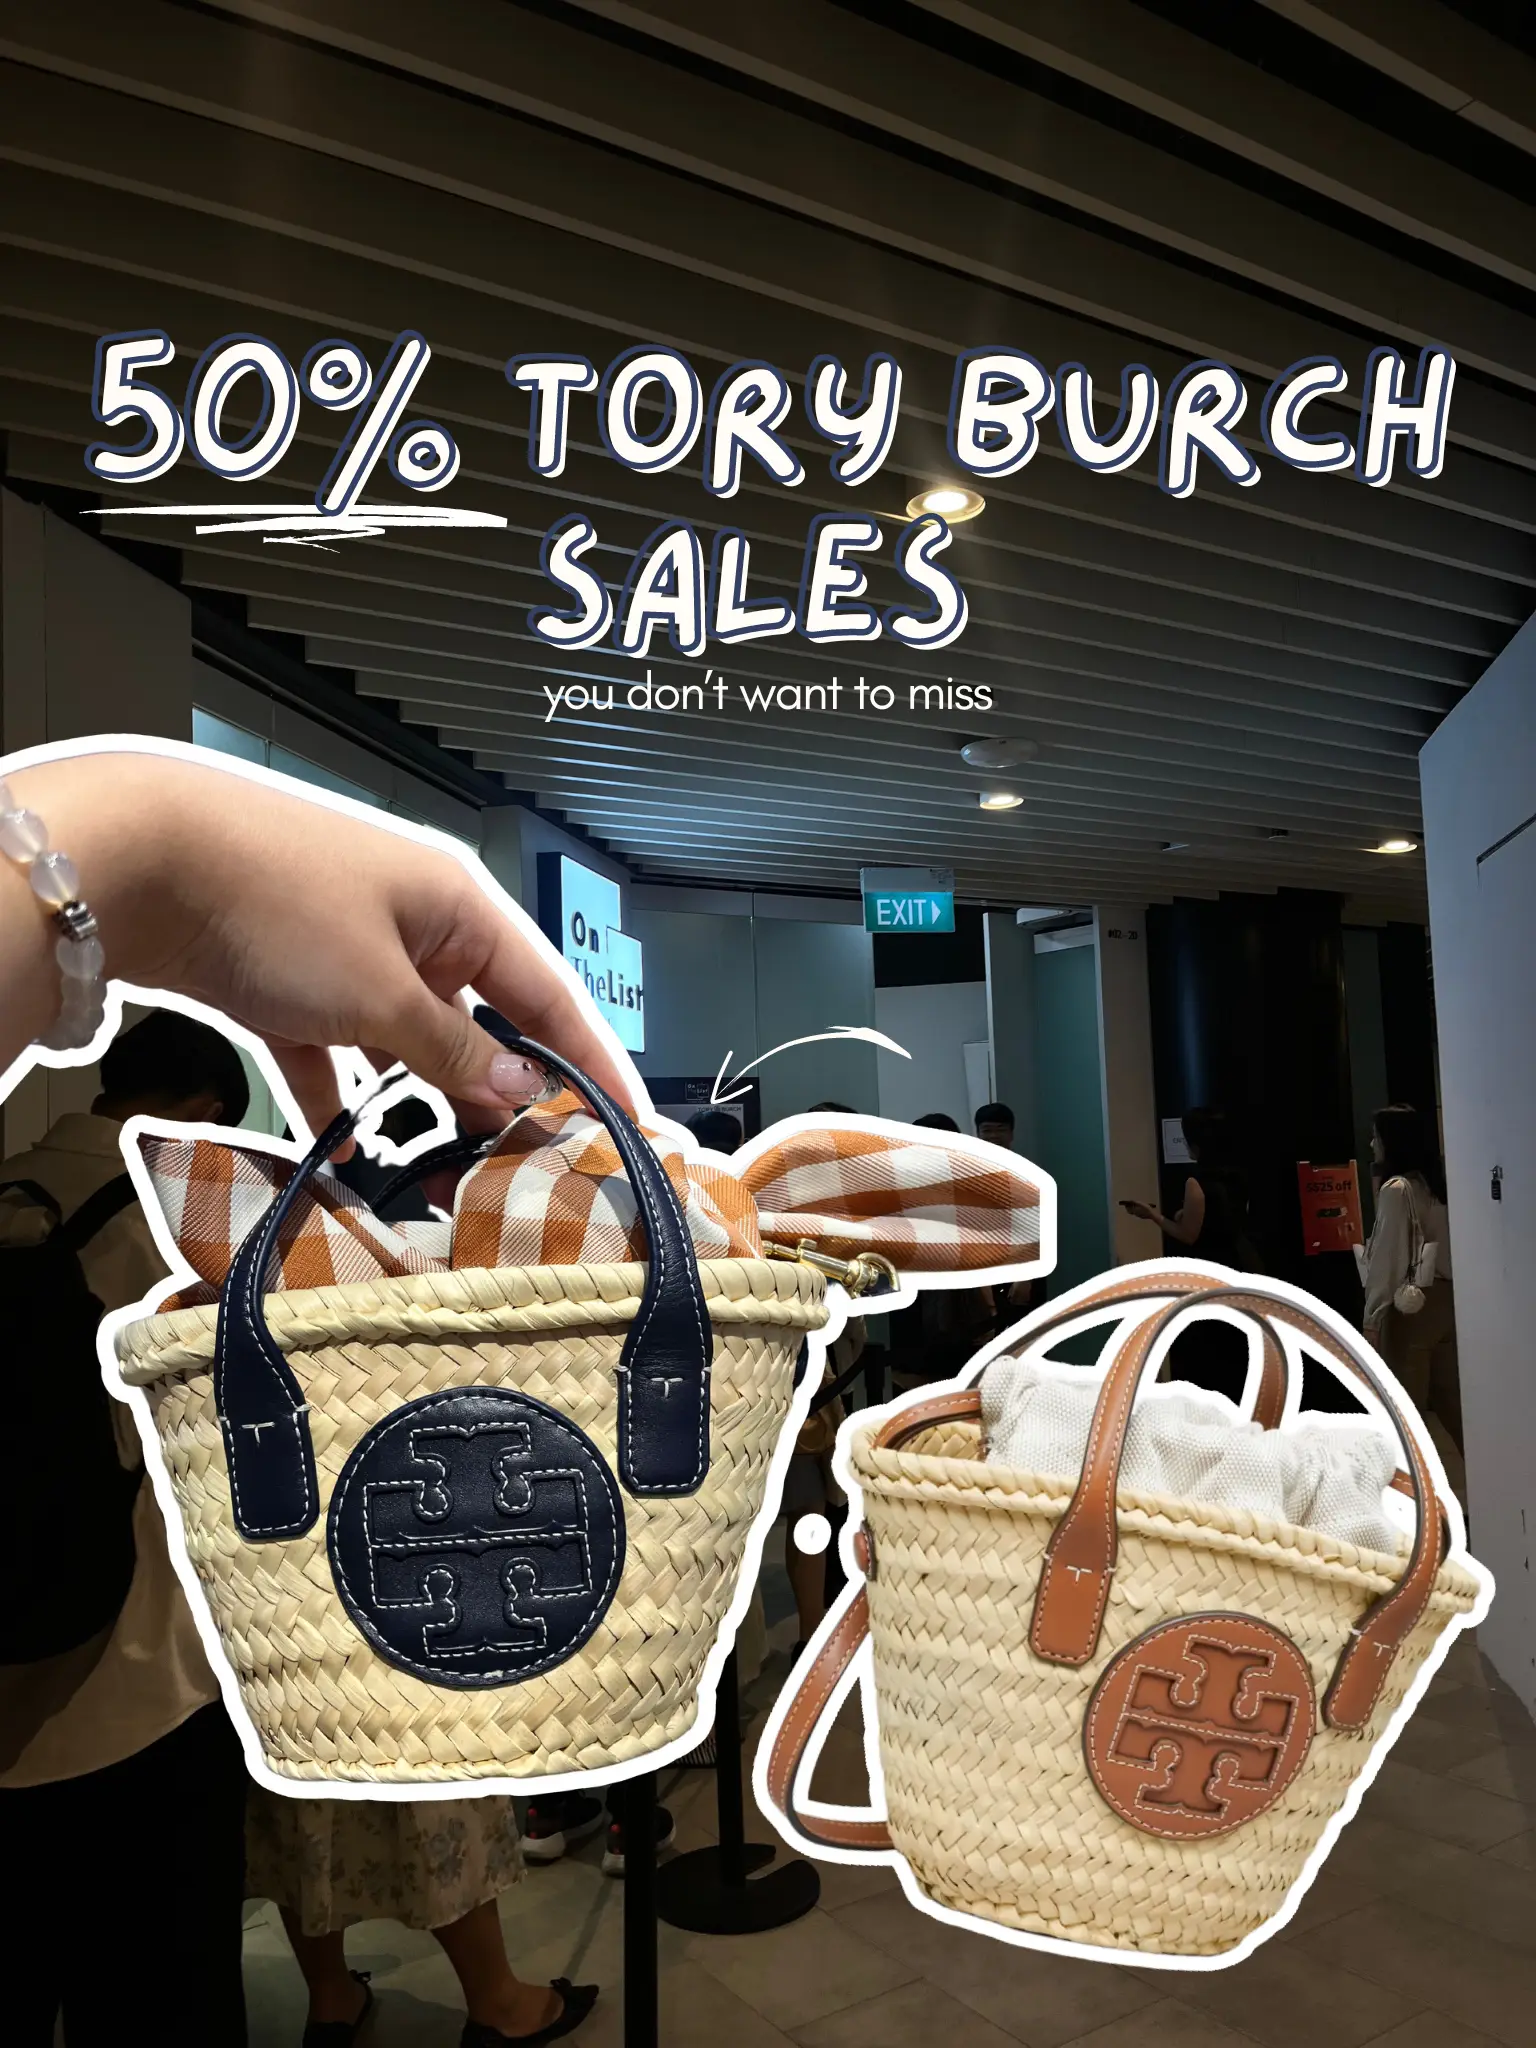 OnTheList Has A Tory Burch Sale At CIMB Plaza